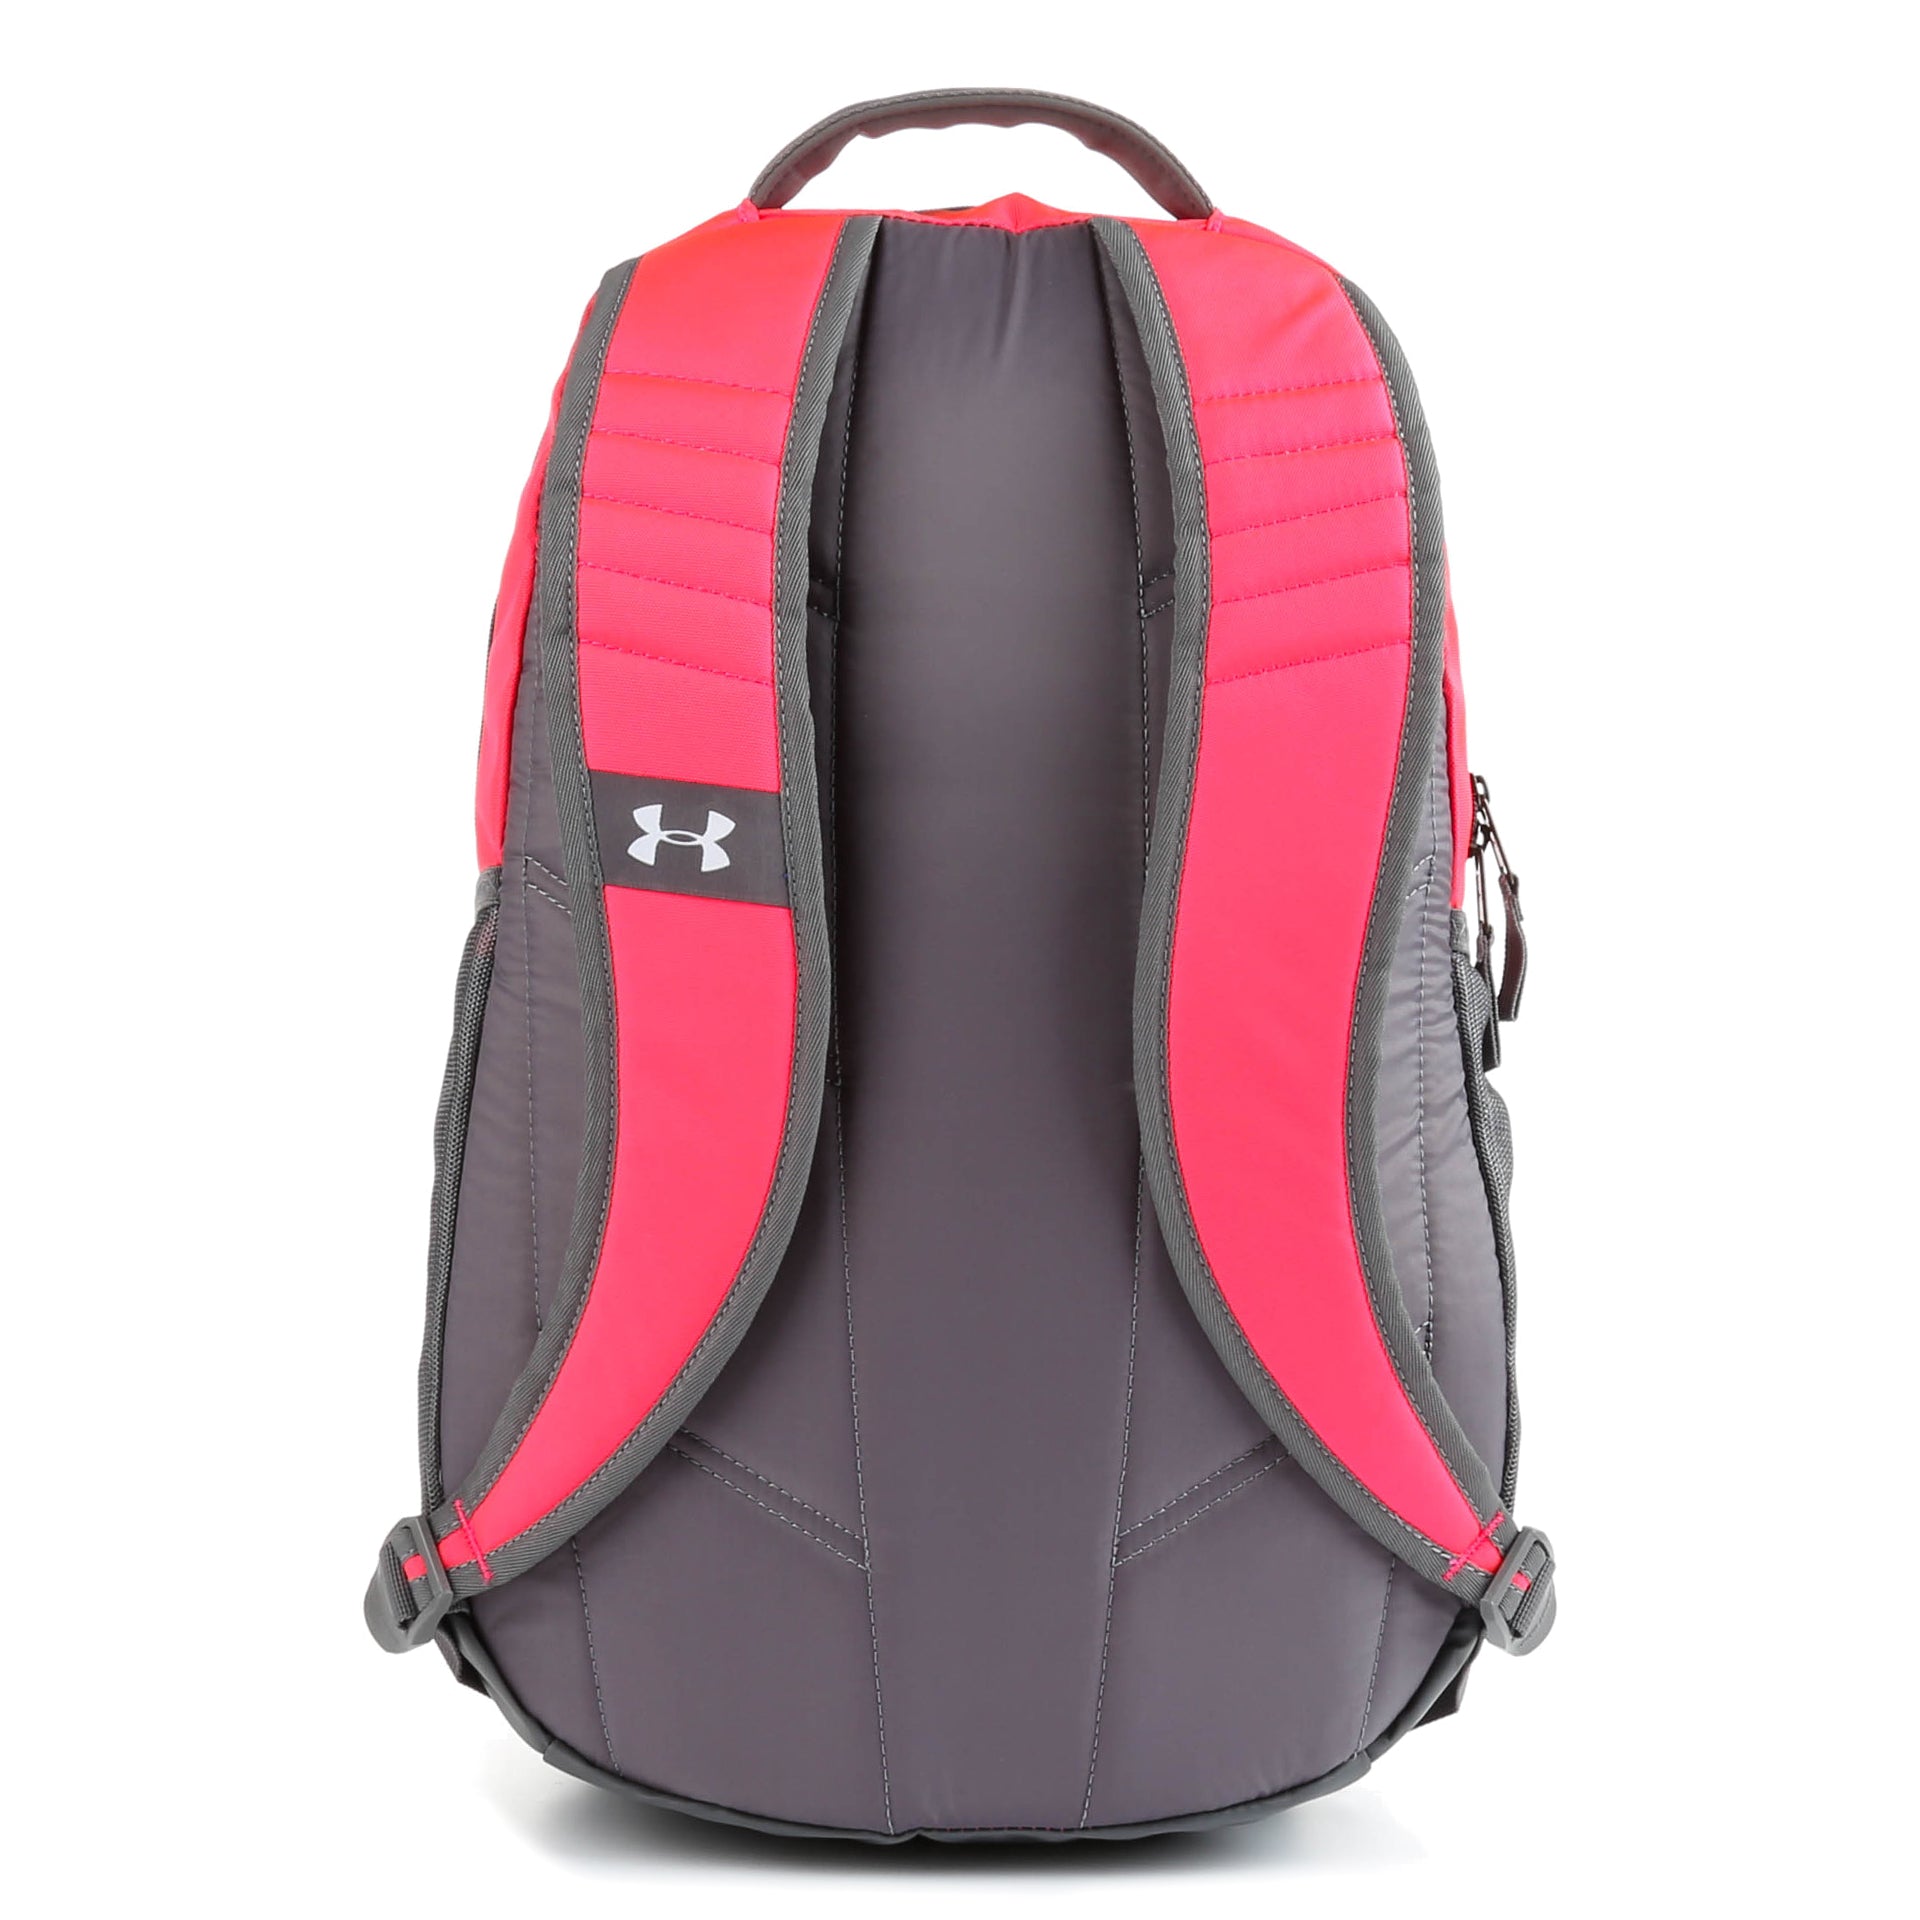 Under Armour, Bags, Pink Under Armour Backpack